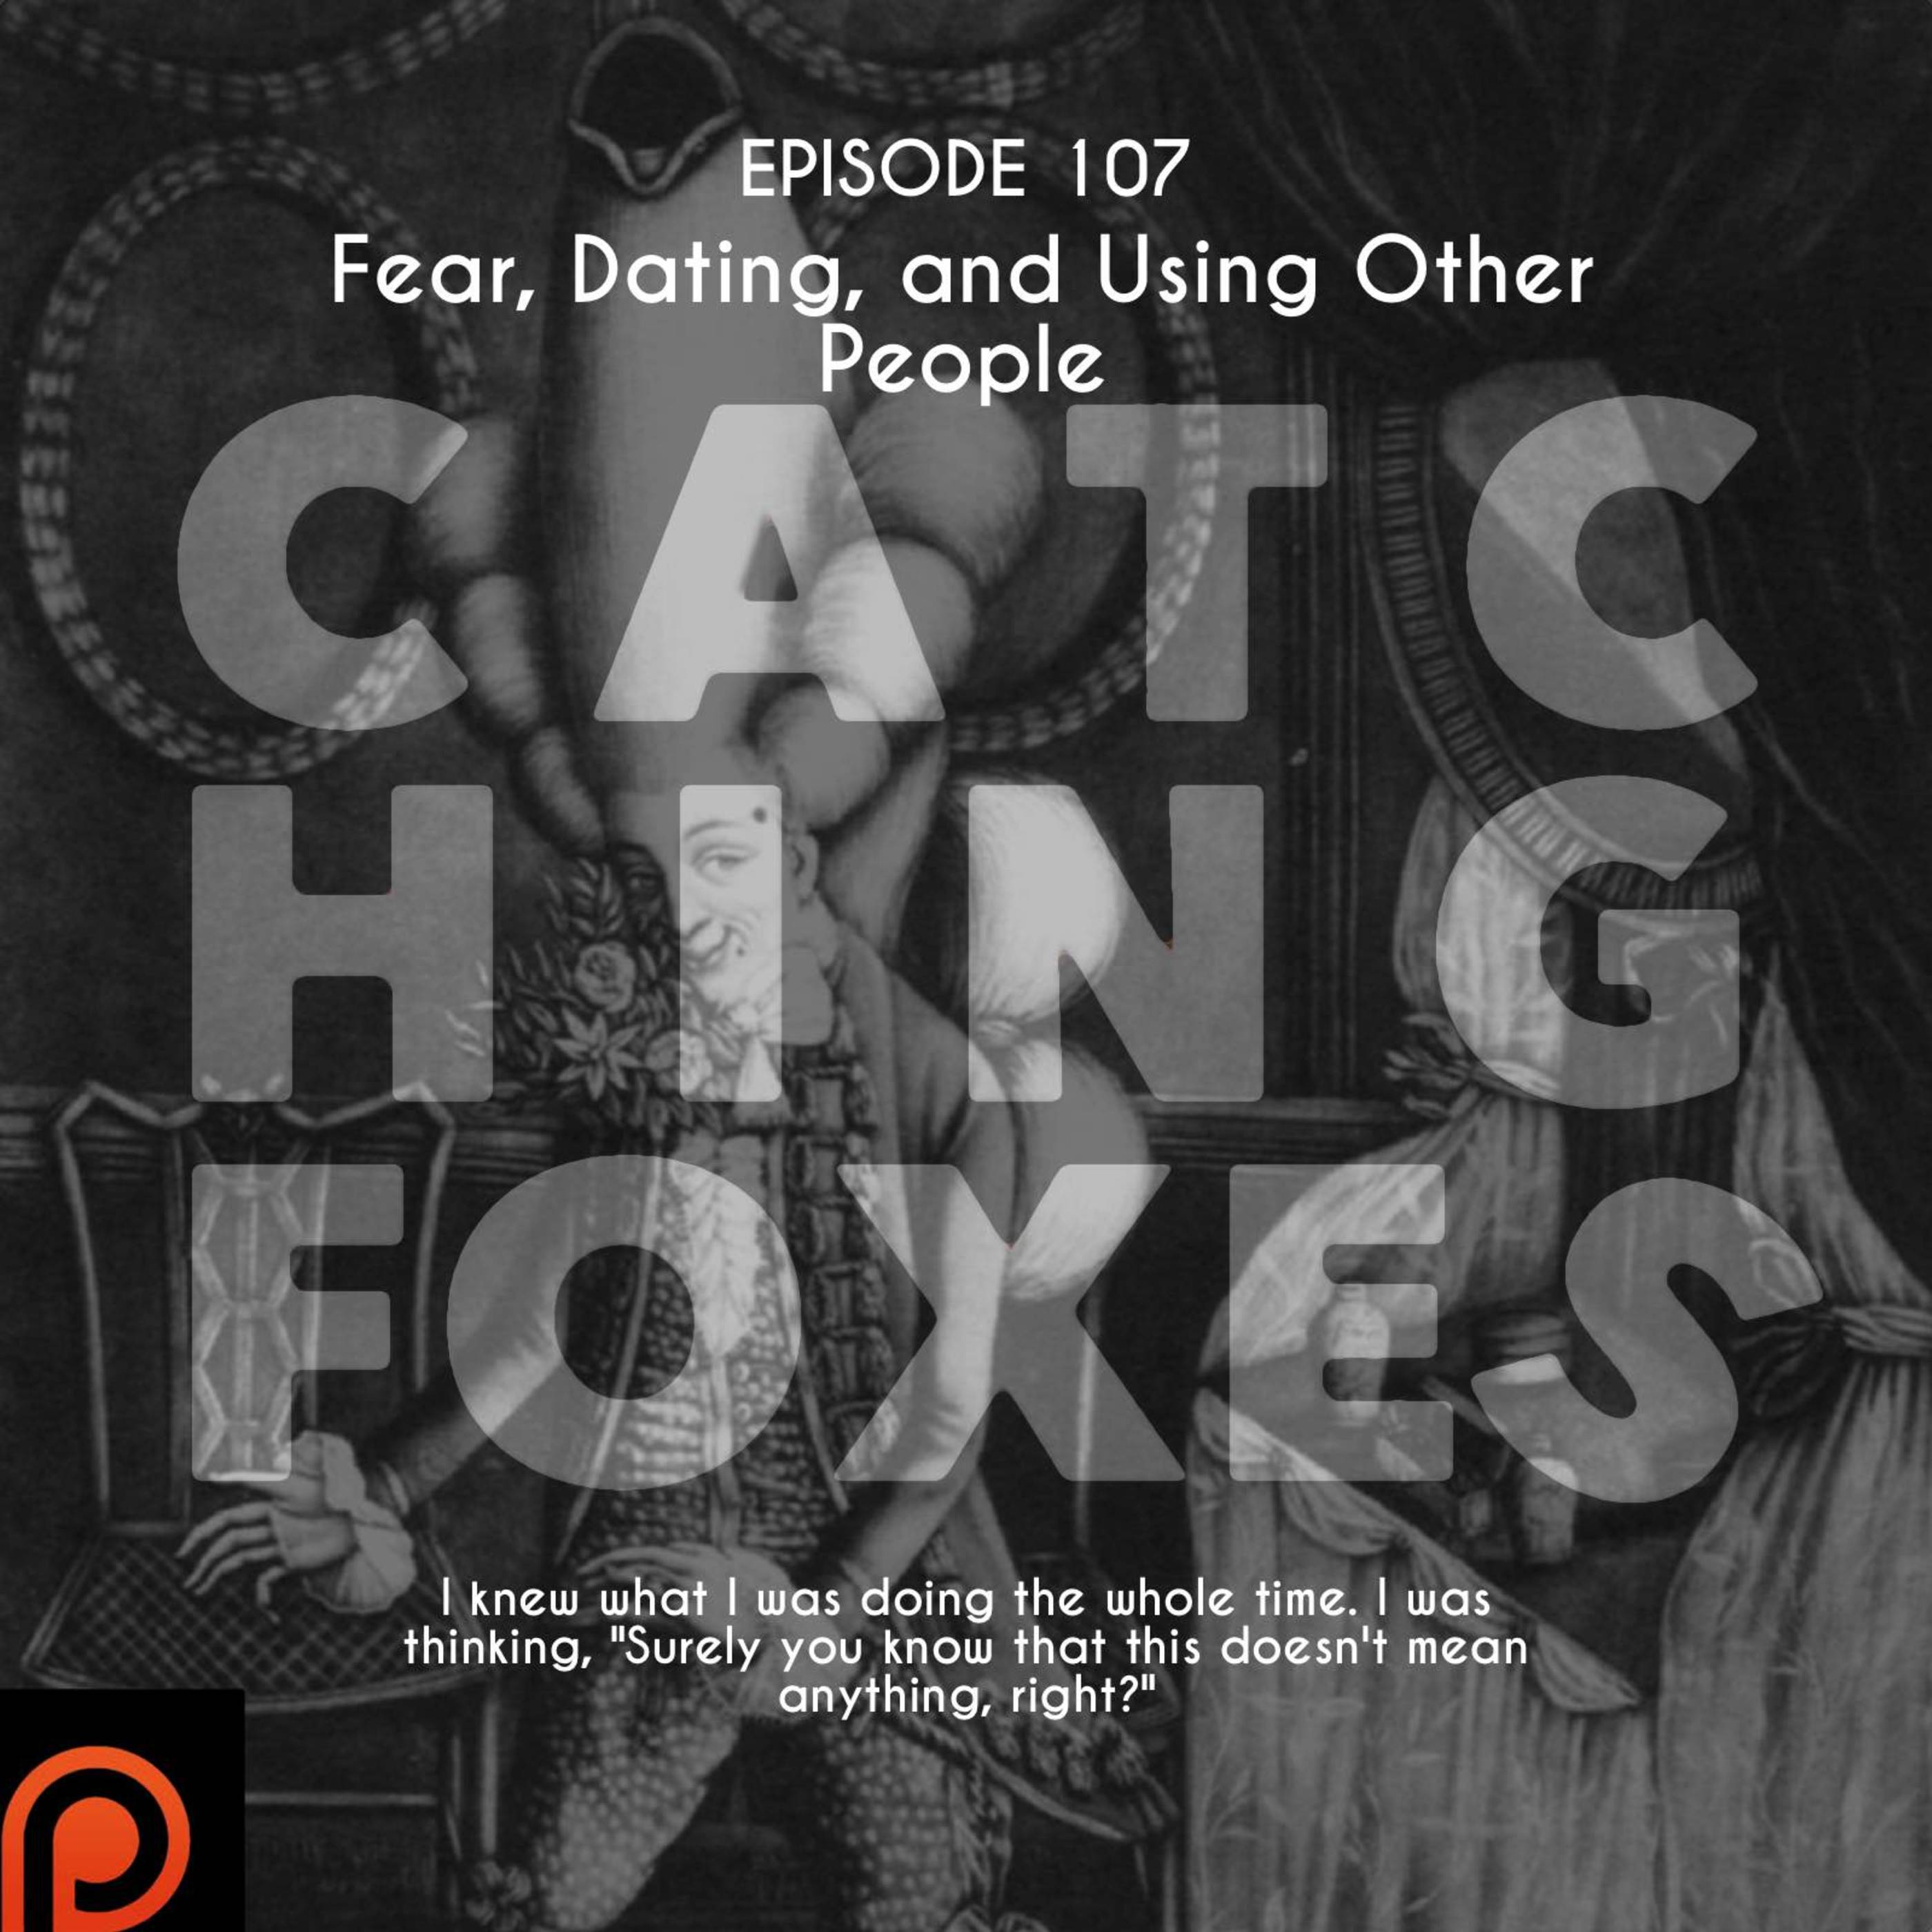 Episode 107: Fear, Dating, and Using Other People